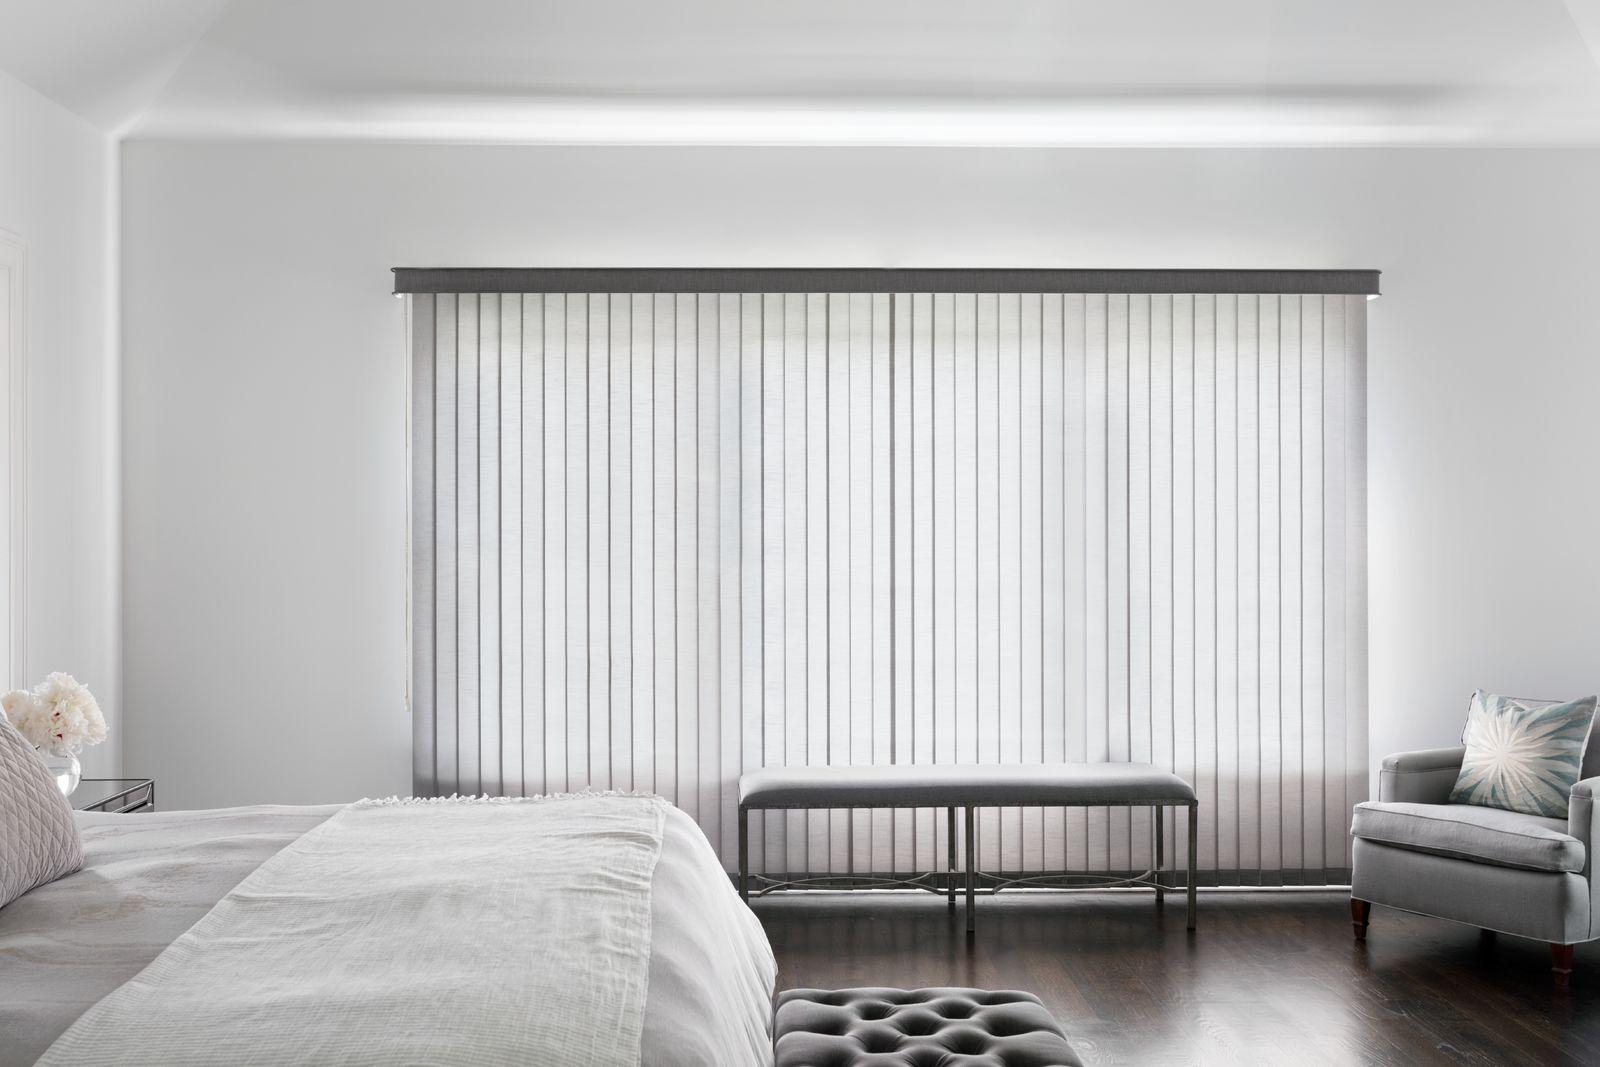 A large bedroom window is covered with fabric vertical blinds.